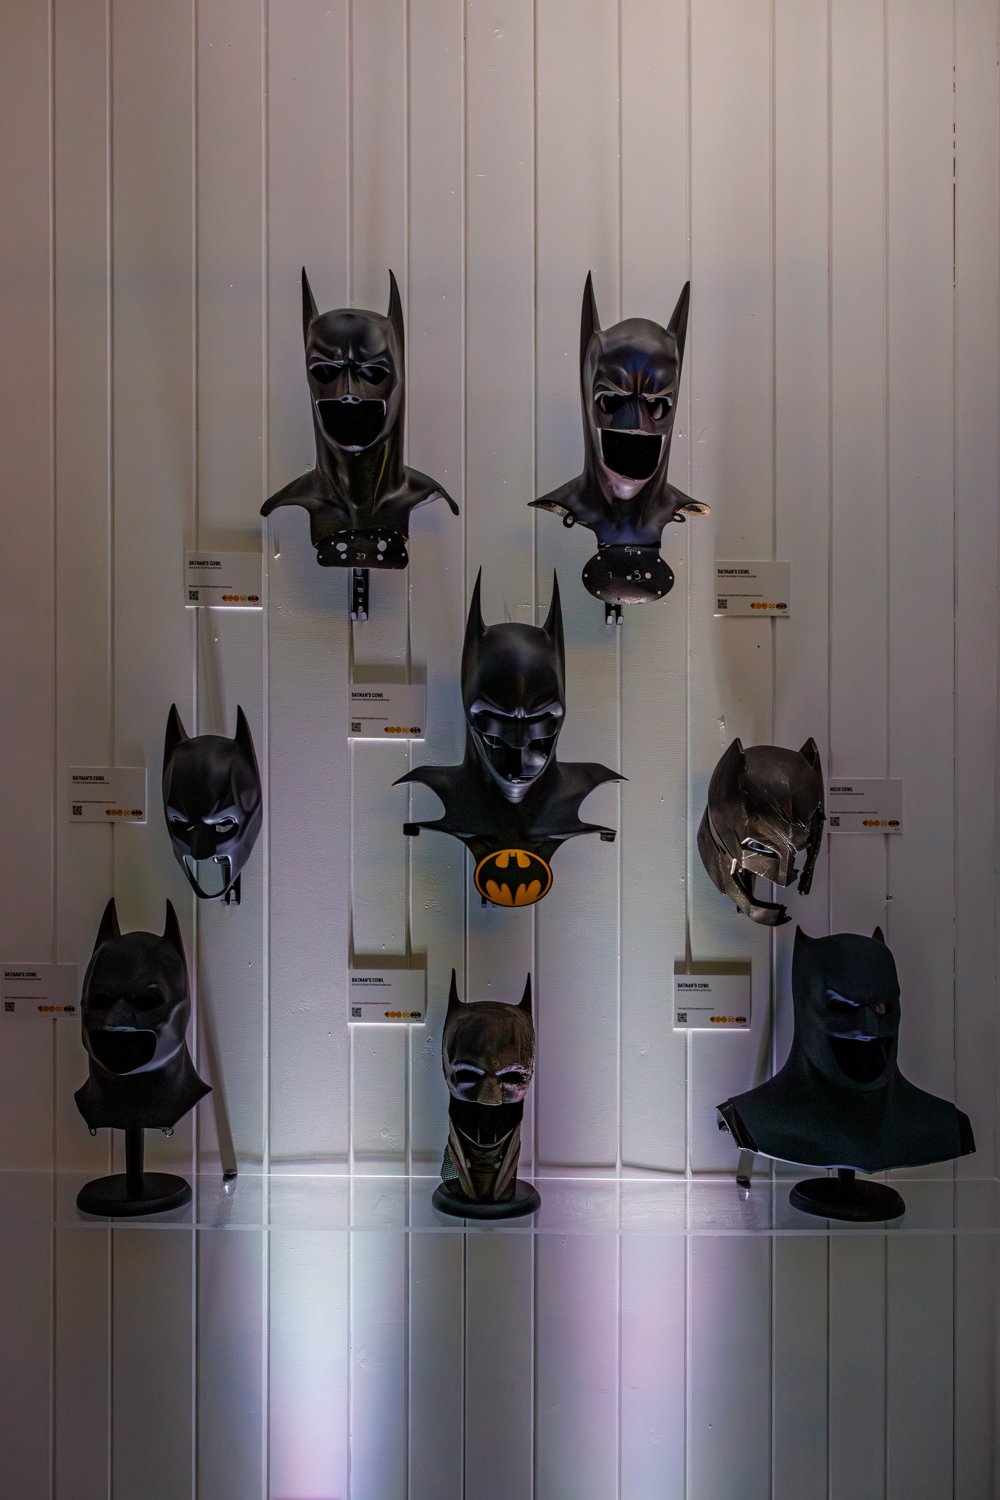  Awesome to see the various Batman cowls from the various films. 